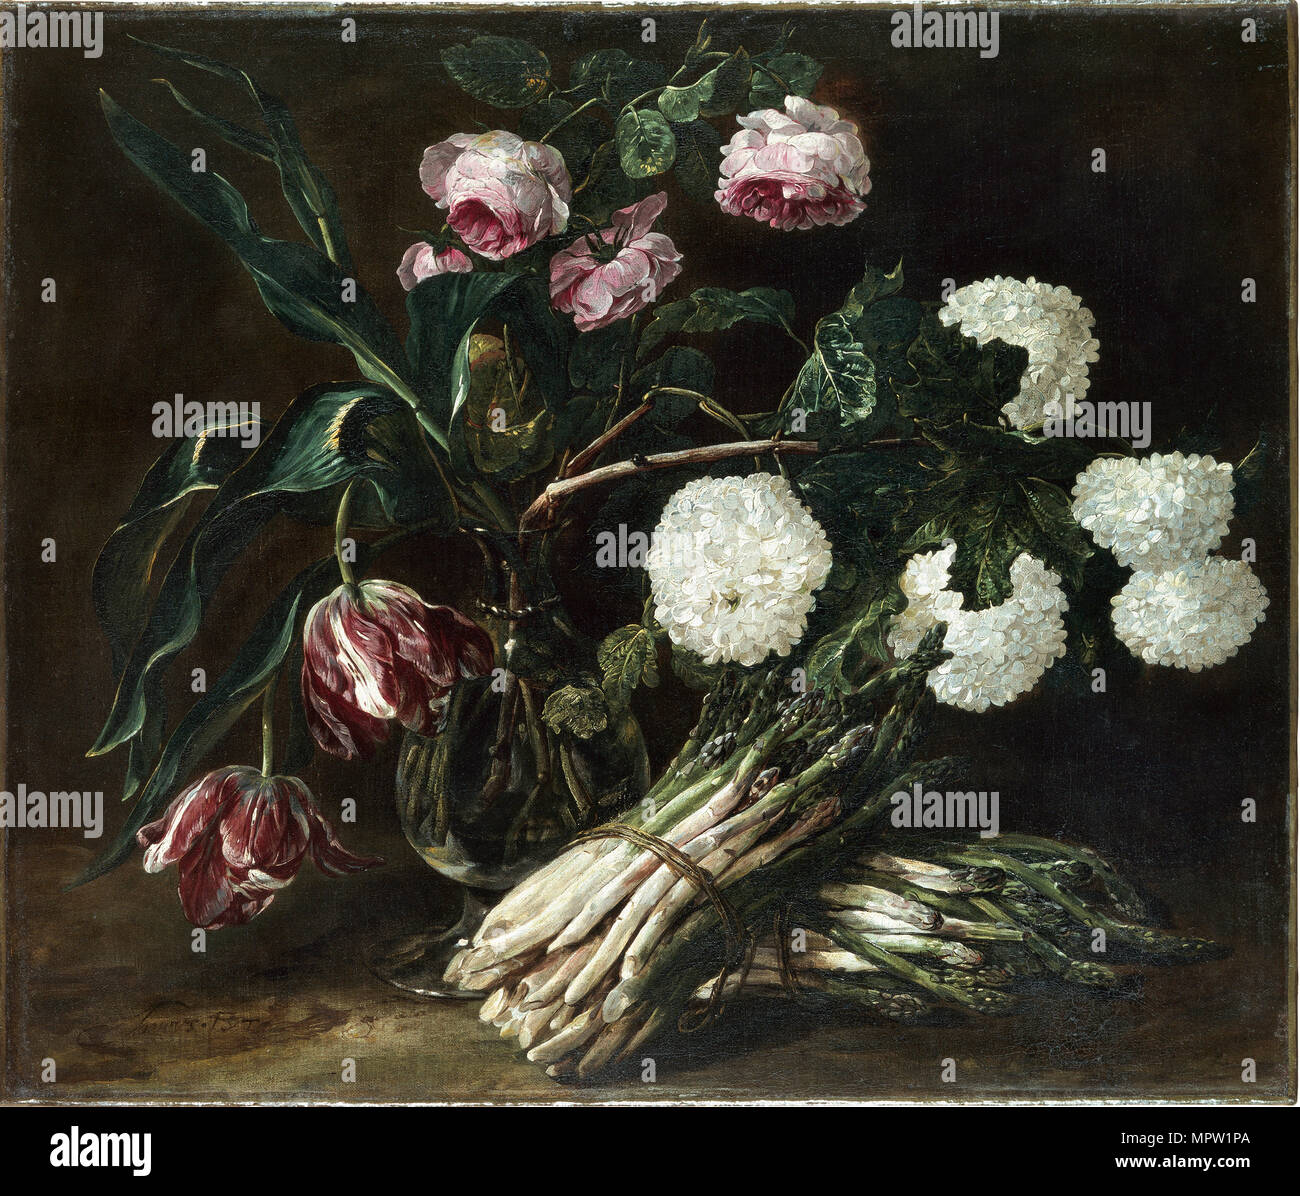 Vase of Flowers and two Bunch of Asparagus, c. 1650. Stock Photo